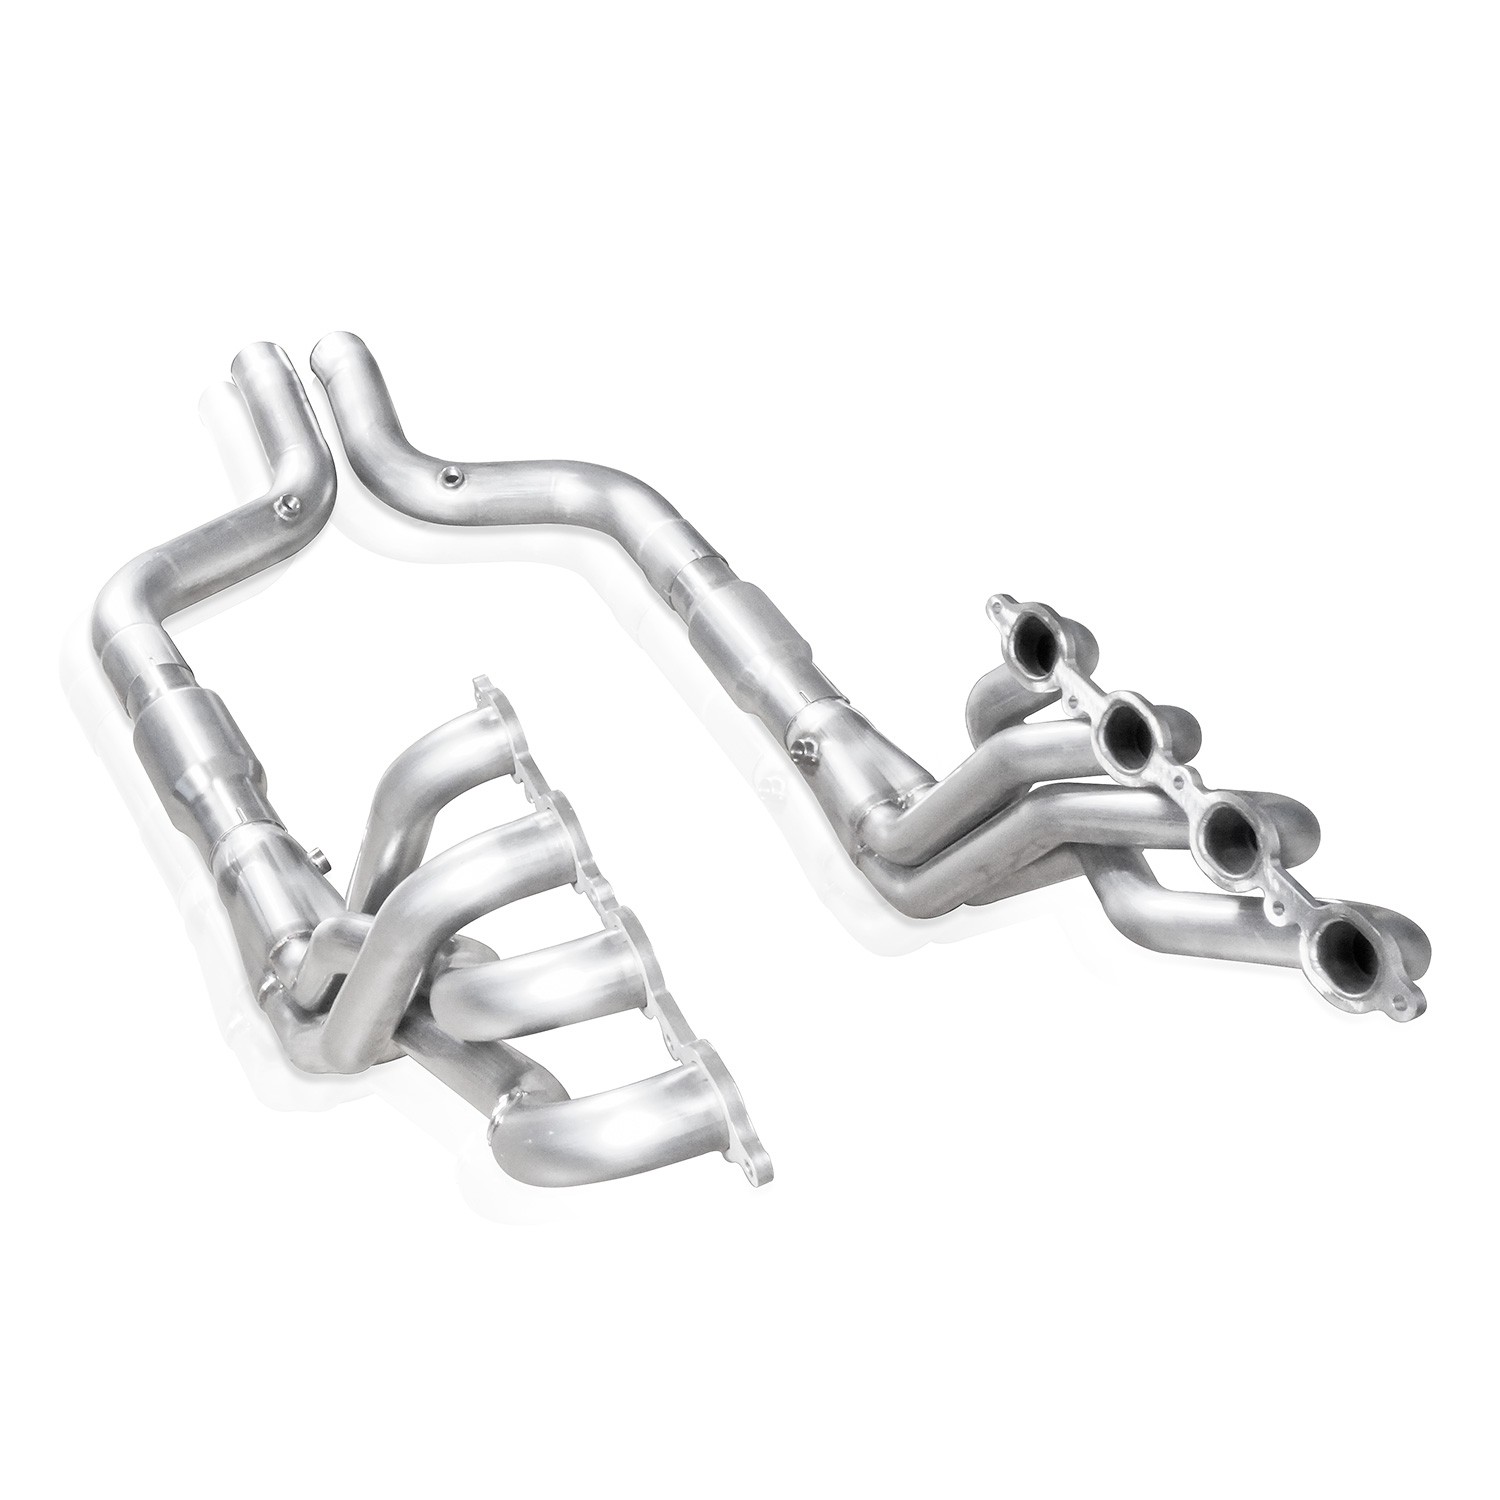 2016+ Camaro SS Stainless Works 1 7/8" Long Tube Headers with Catted Pipes - Performance Connect